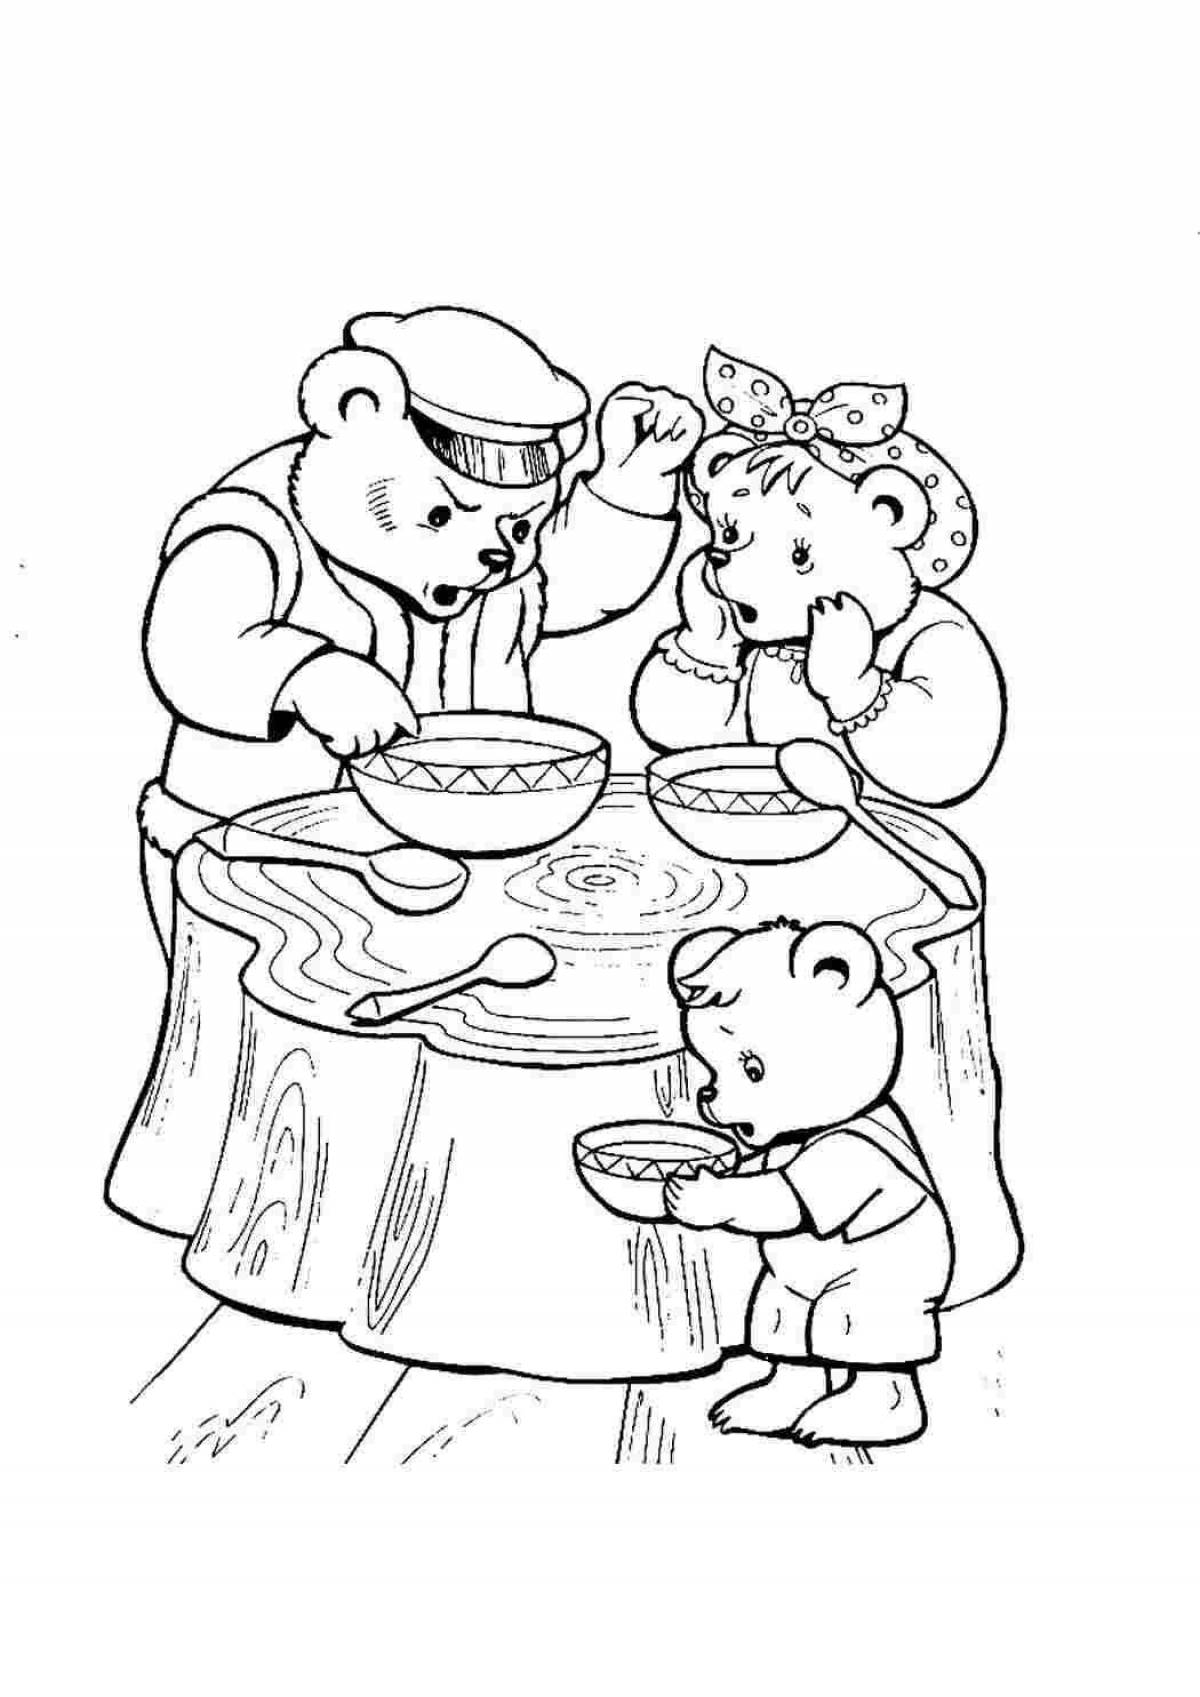 Great fairytale coloring book